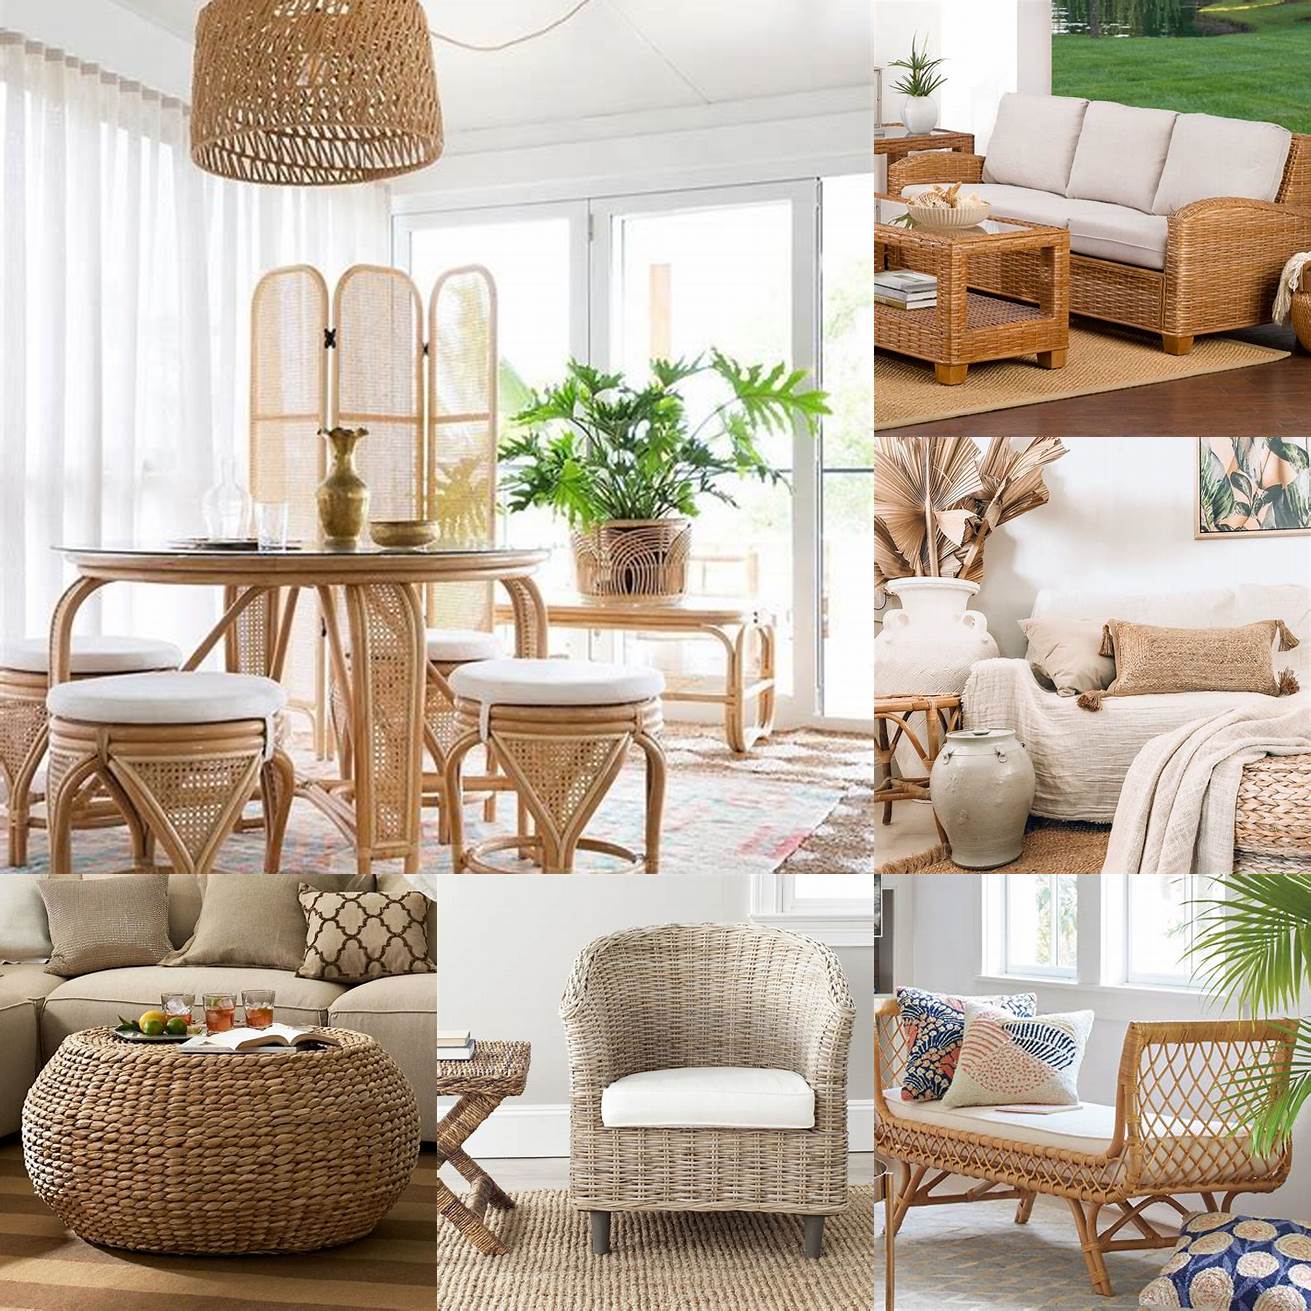 Use natural materials like wood wicker and jute to really capture that seaside feel